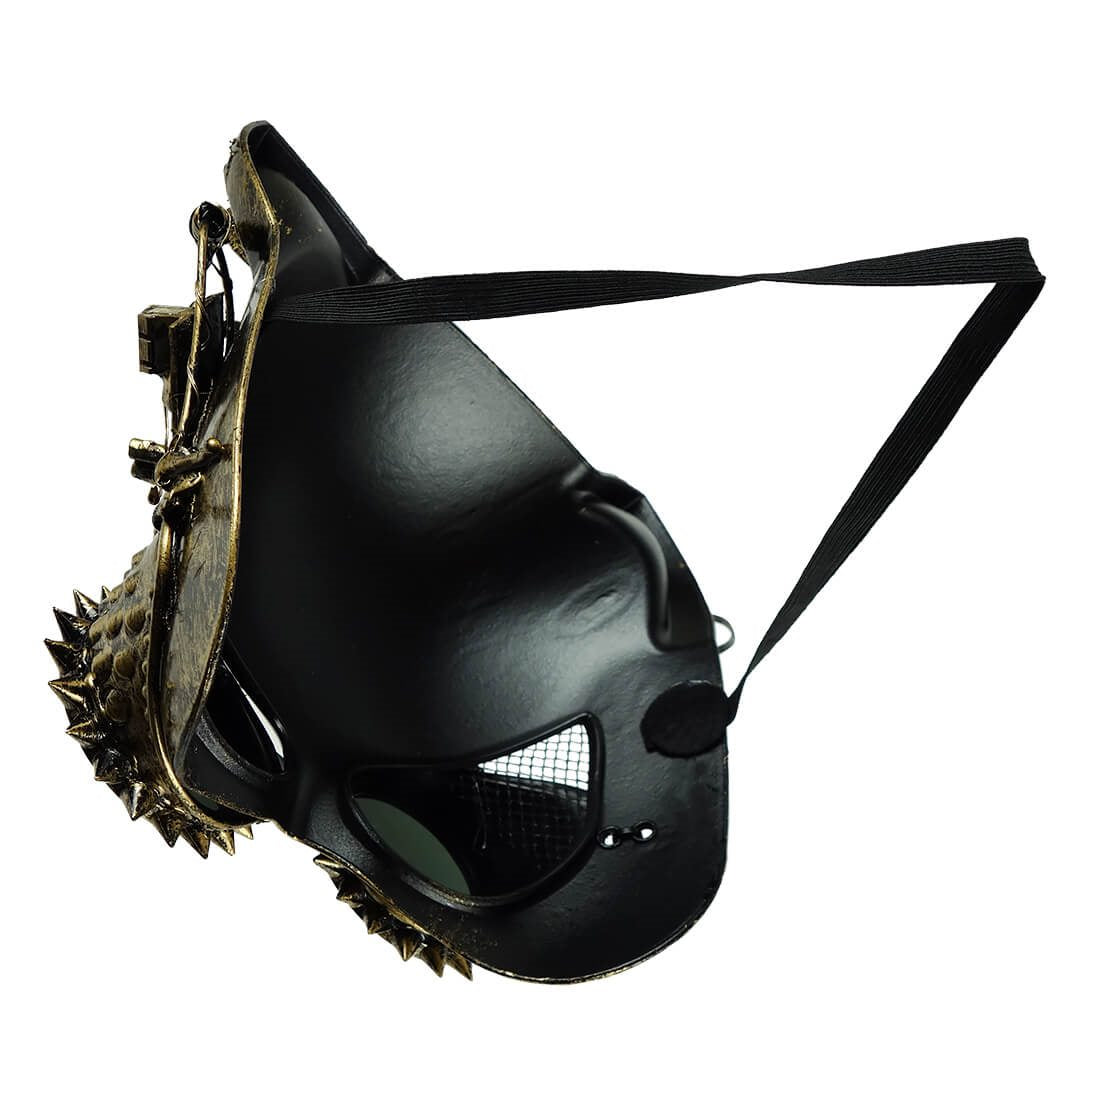 Lighted Gold Steampunk Cat Mask